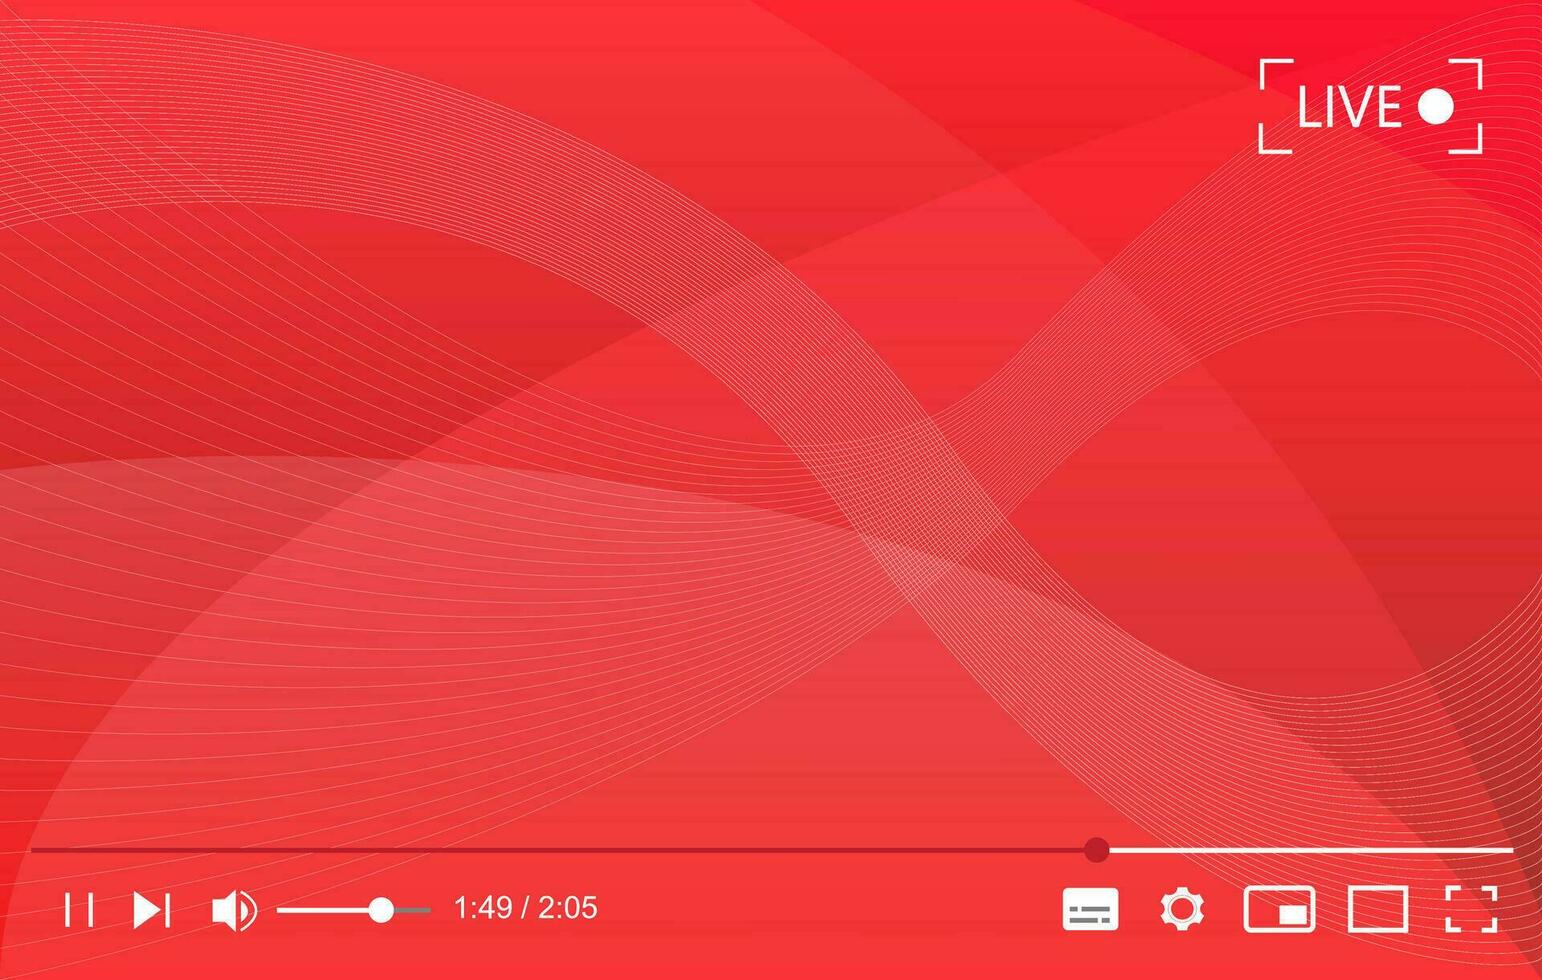 Multimedia video player with blue wavy background, live streaming cover, vector illustration